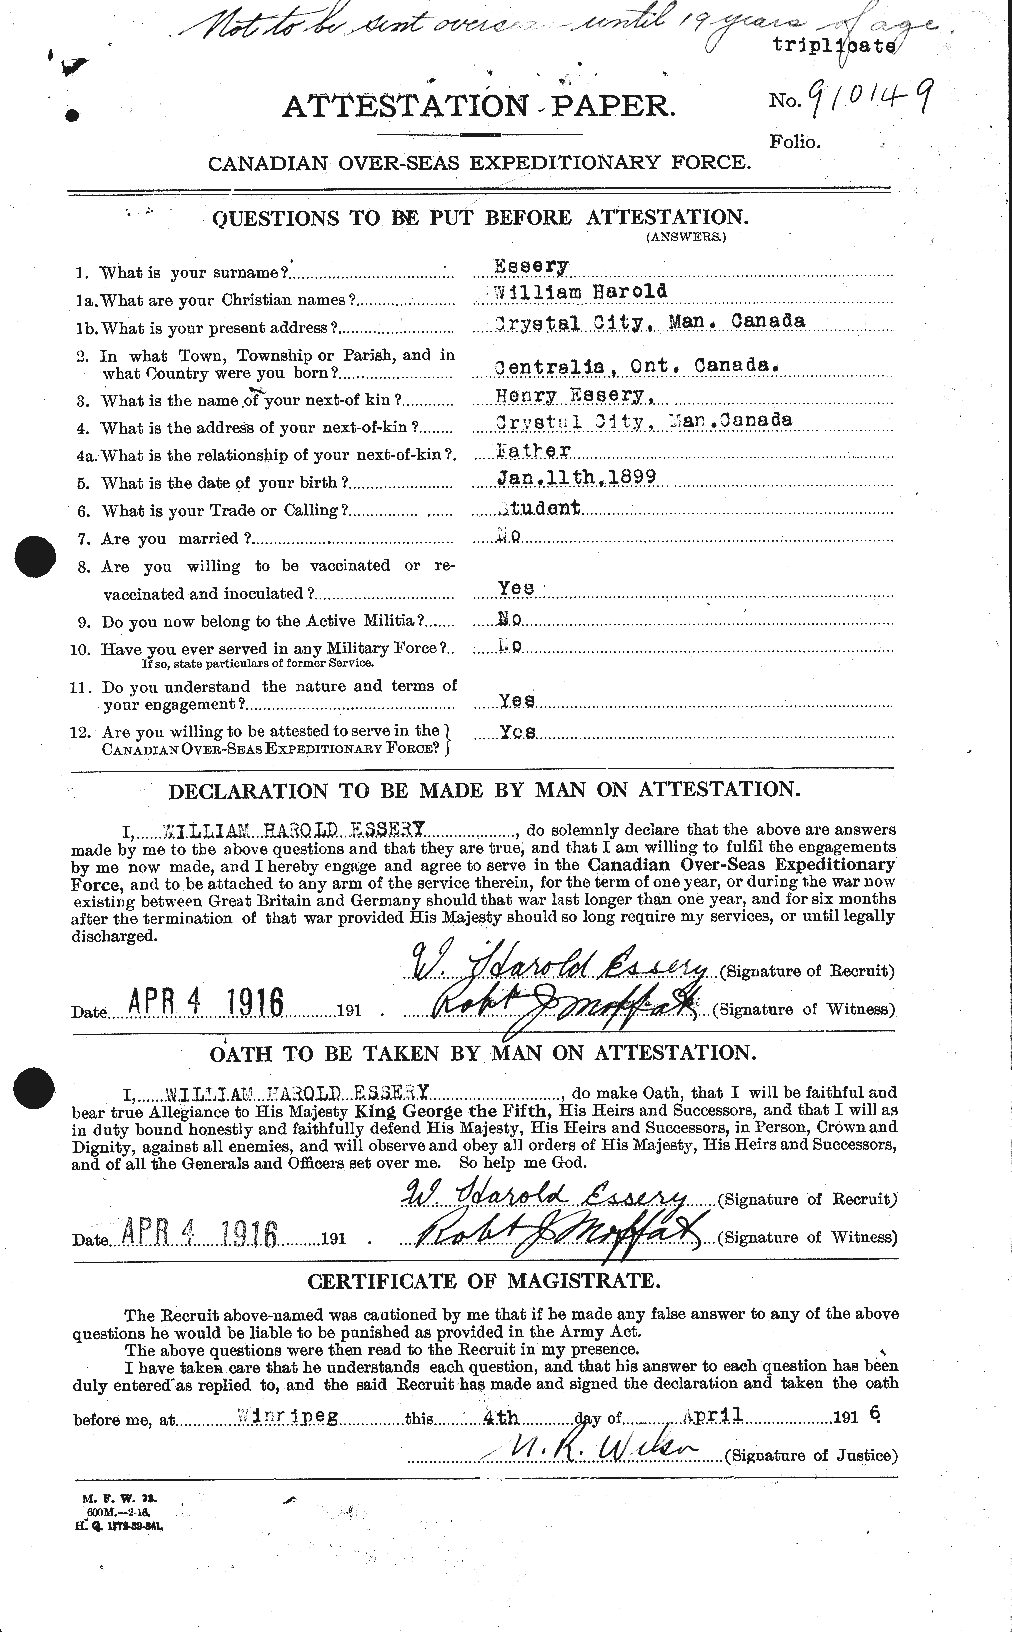 Personnel Records of the First World War - CEF 316681a